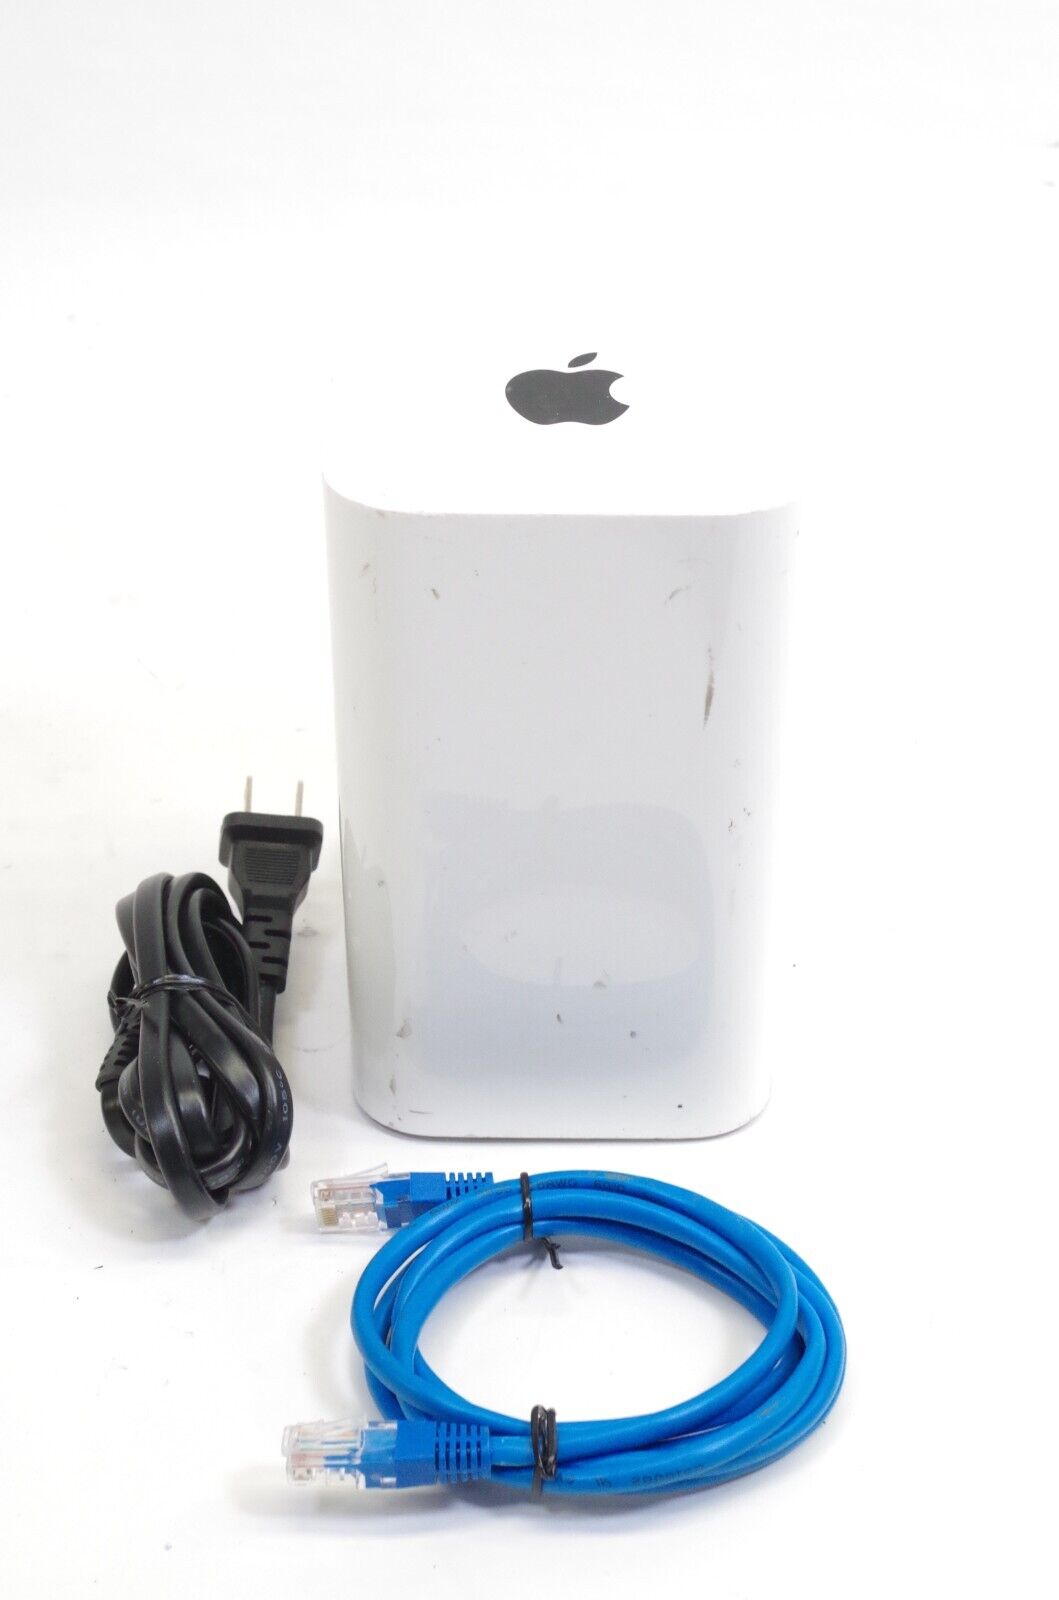 Apple AirPort Extreme Base Station Wireless Router A1521